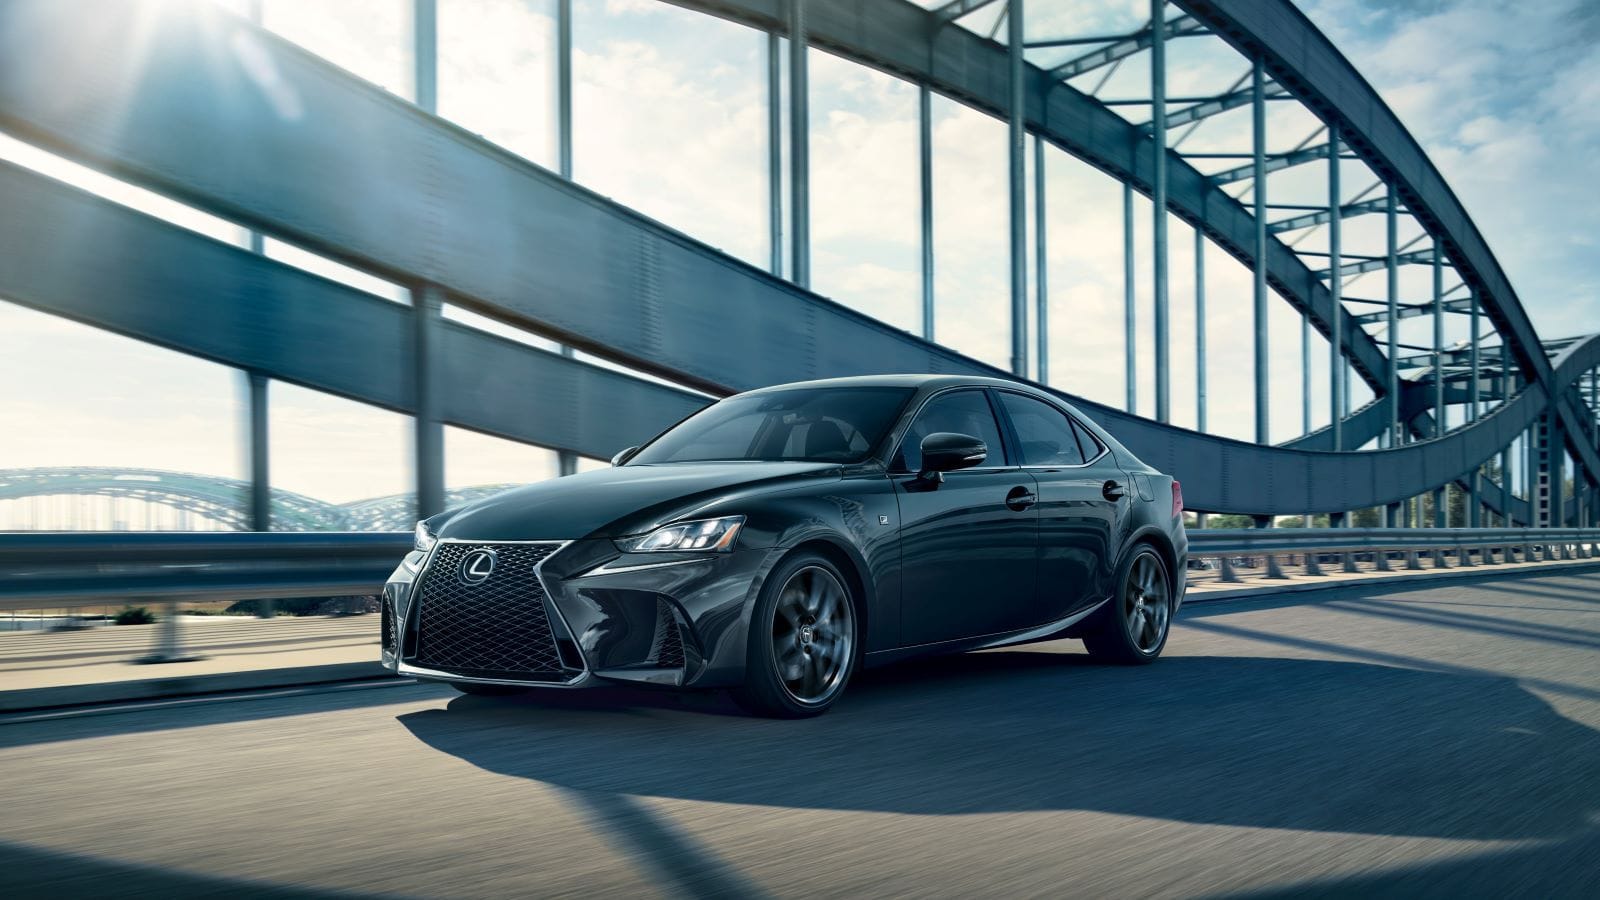 2021 IS May Receive Last Naturally-Aspirated Lexus V8 - ClubLexus ...